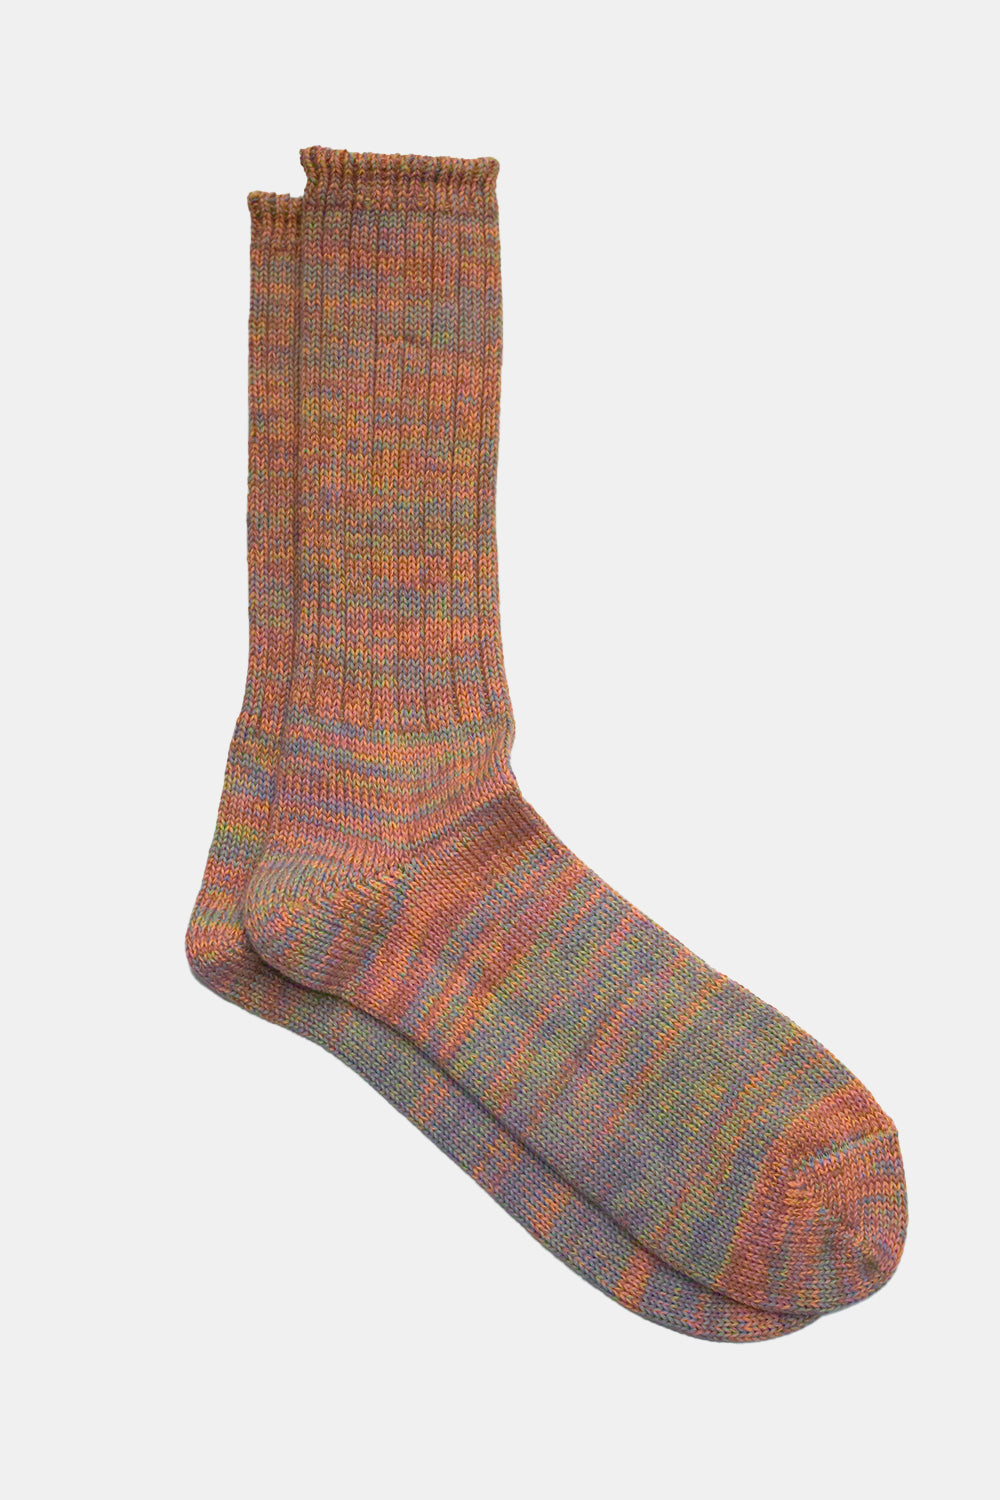 Anonymous Ism 5 Colour Mix Ribbed Crew Socks (Pink)
